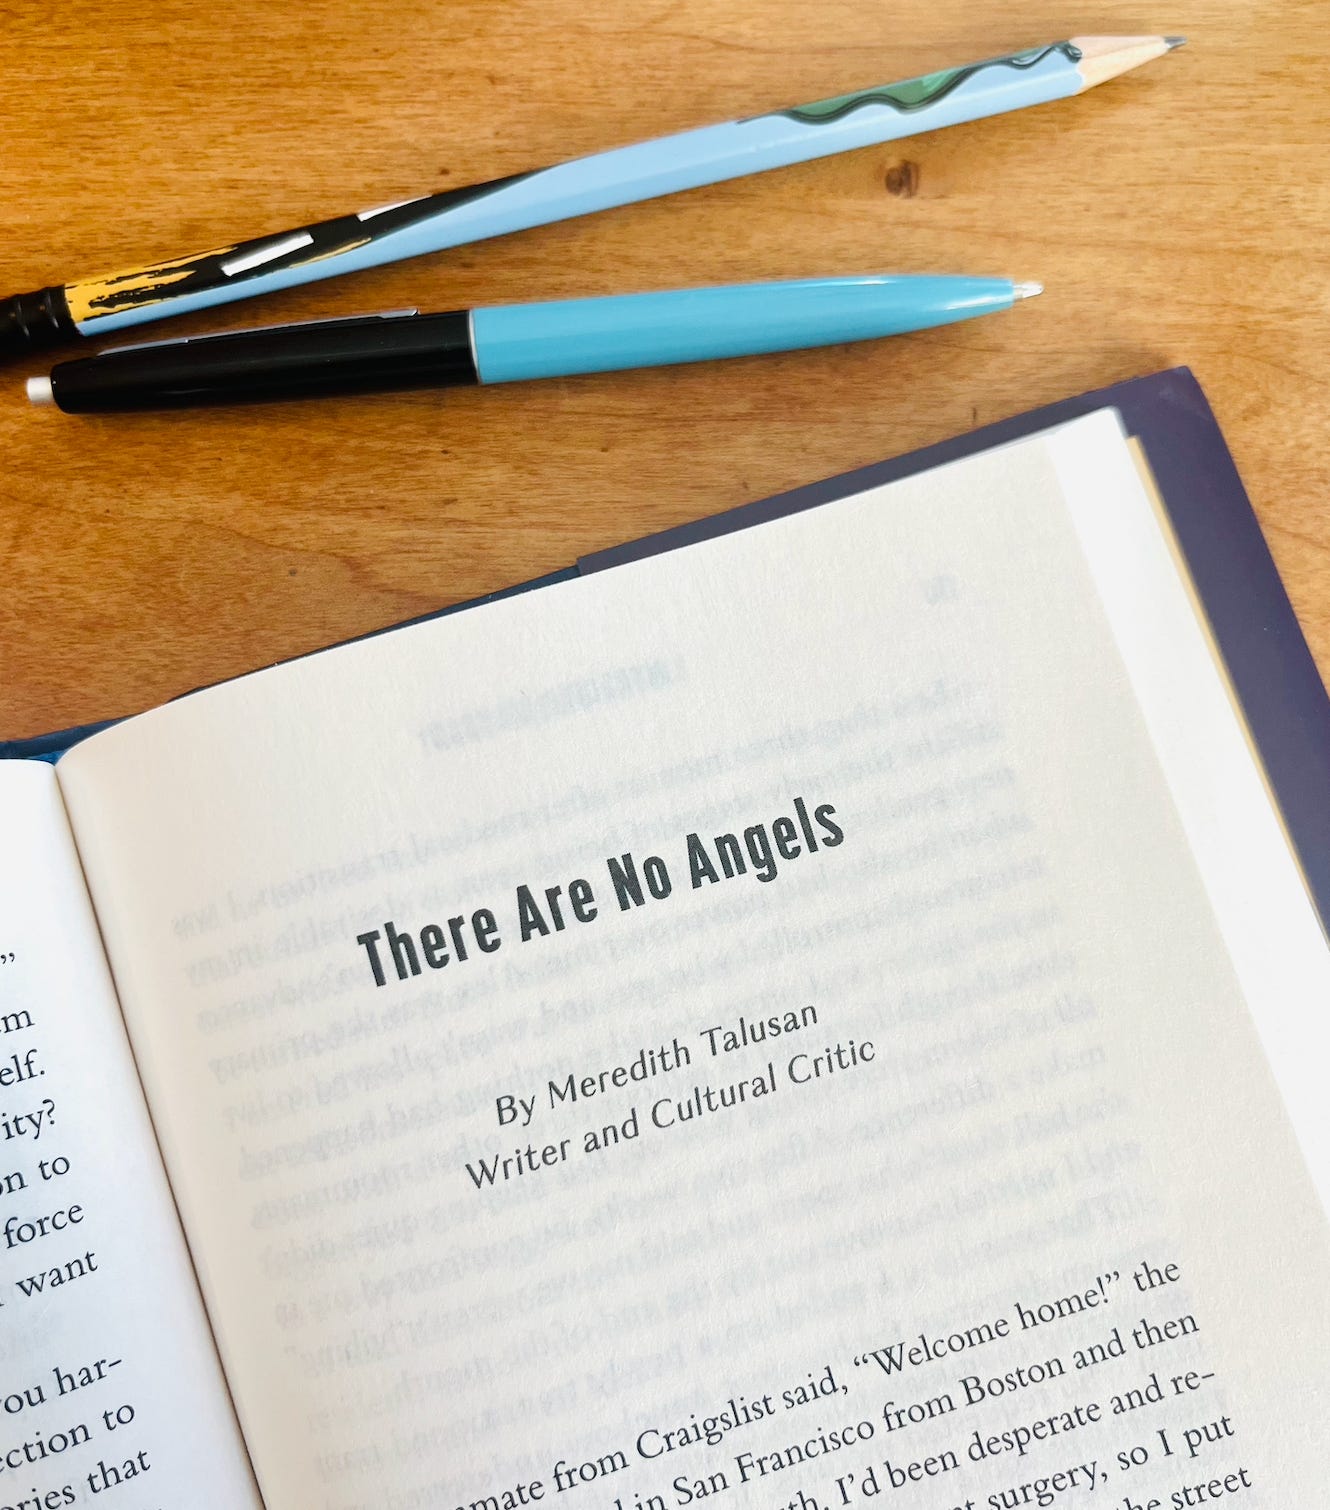 A book opened to the title page of the essay "There Are No Angels" by Meredith Talusan